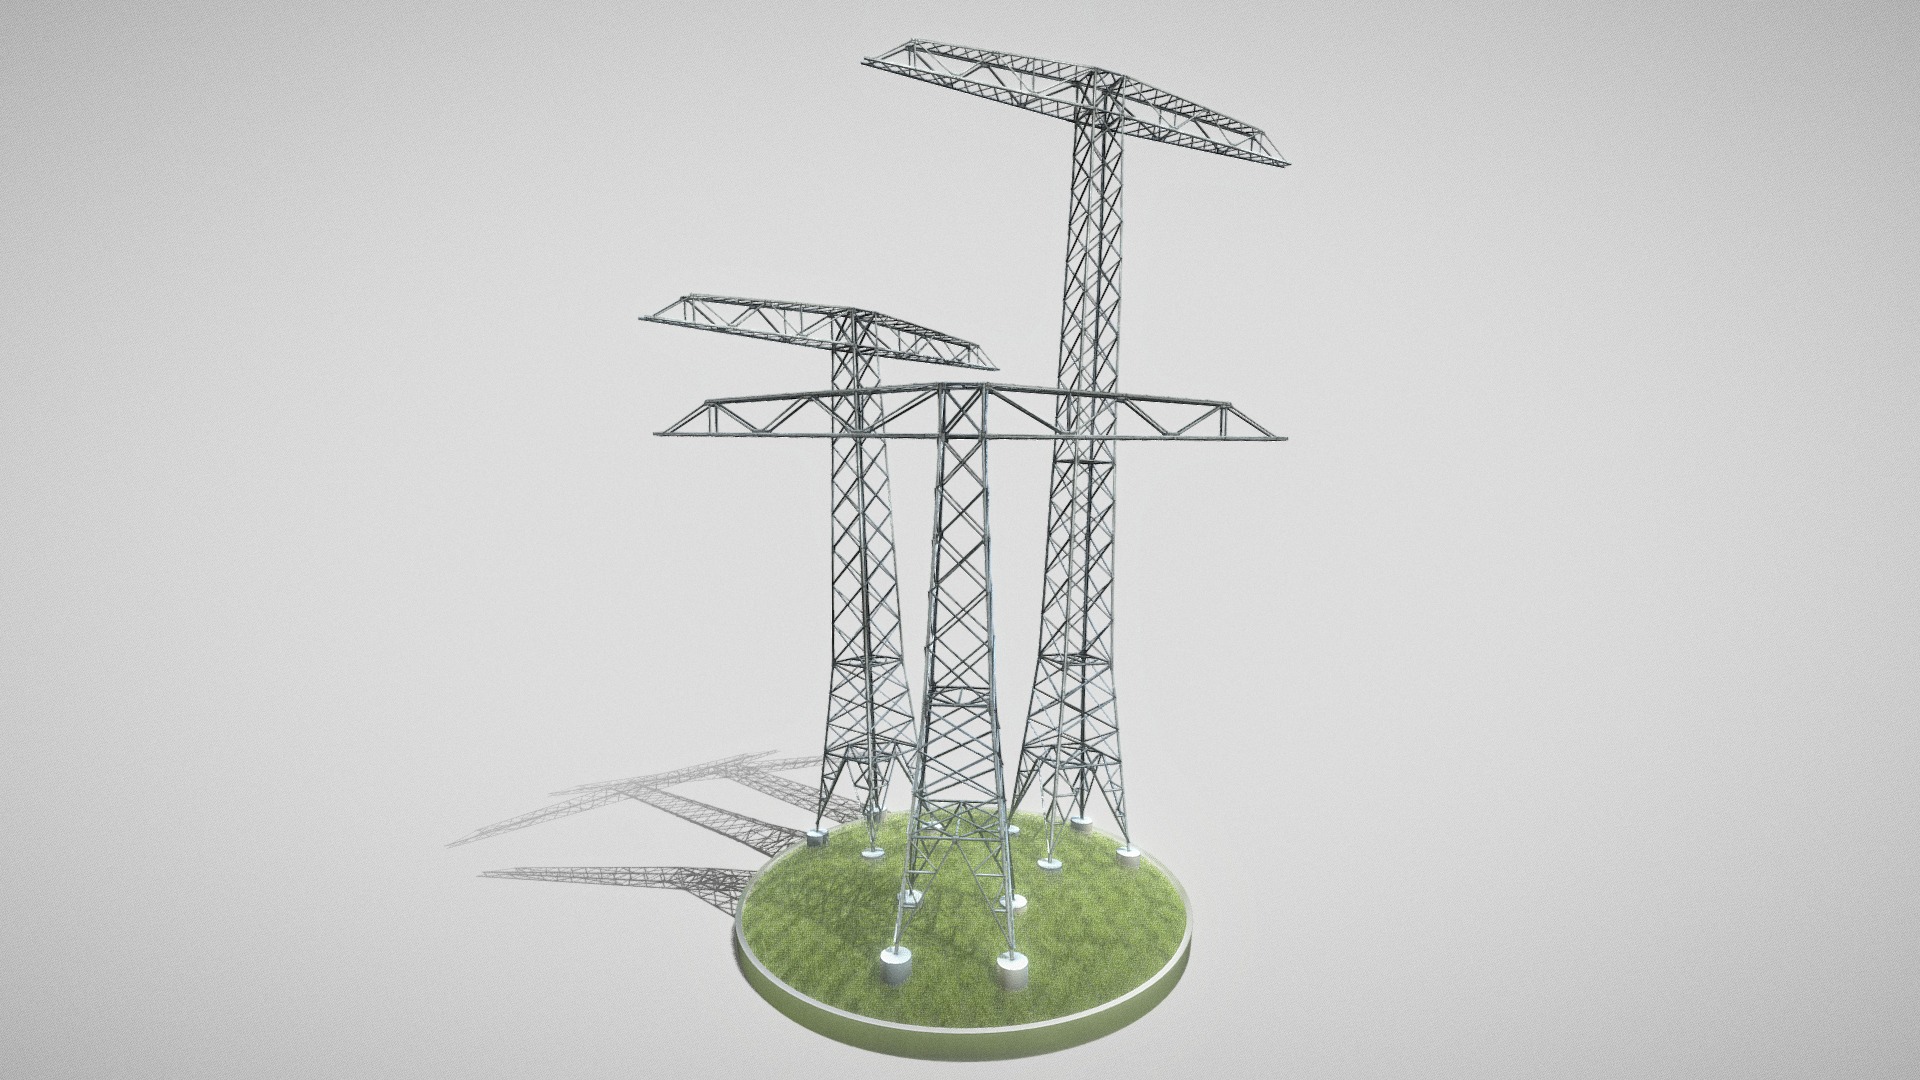 3D model Transmission Tower Package - This is a 3D model of the Transmission Tower Package. The 3D model is about a metal tower with a wire.